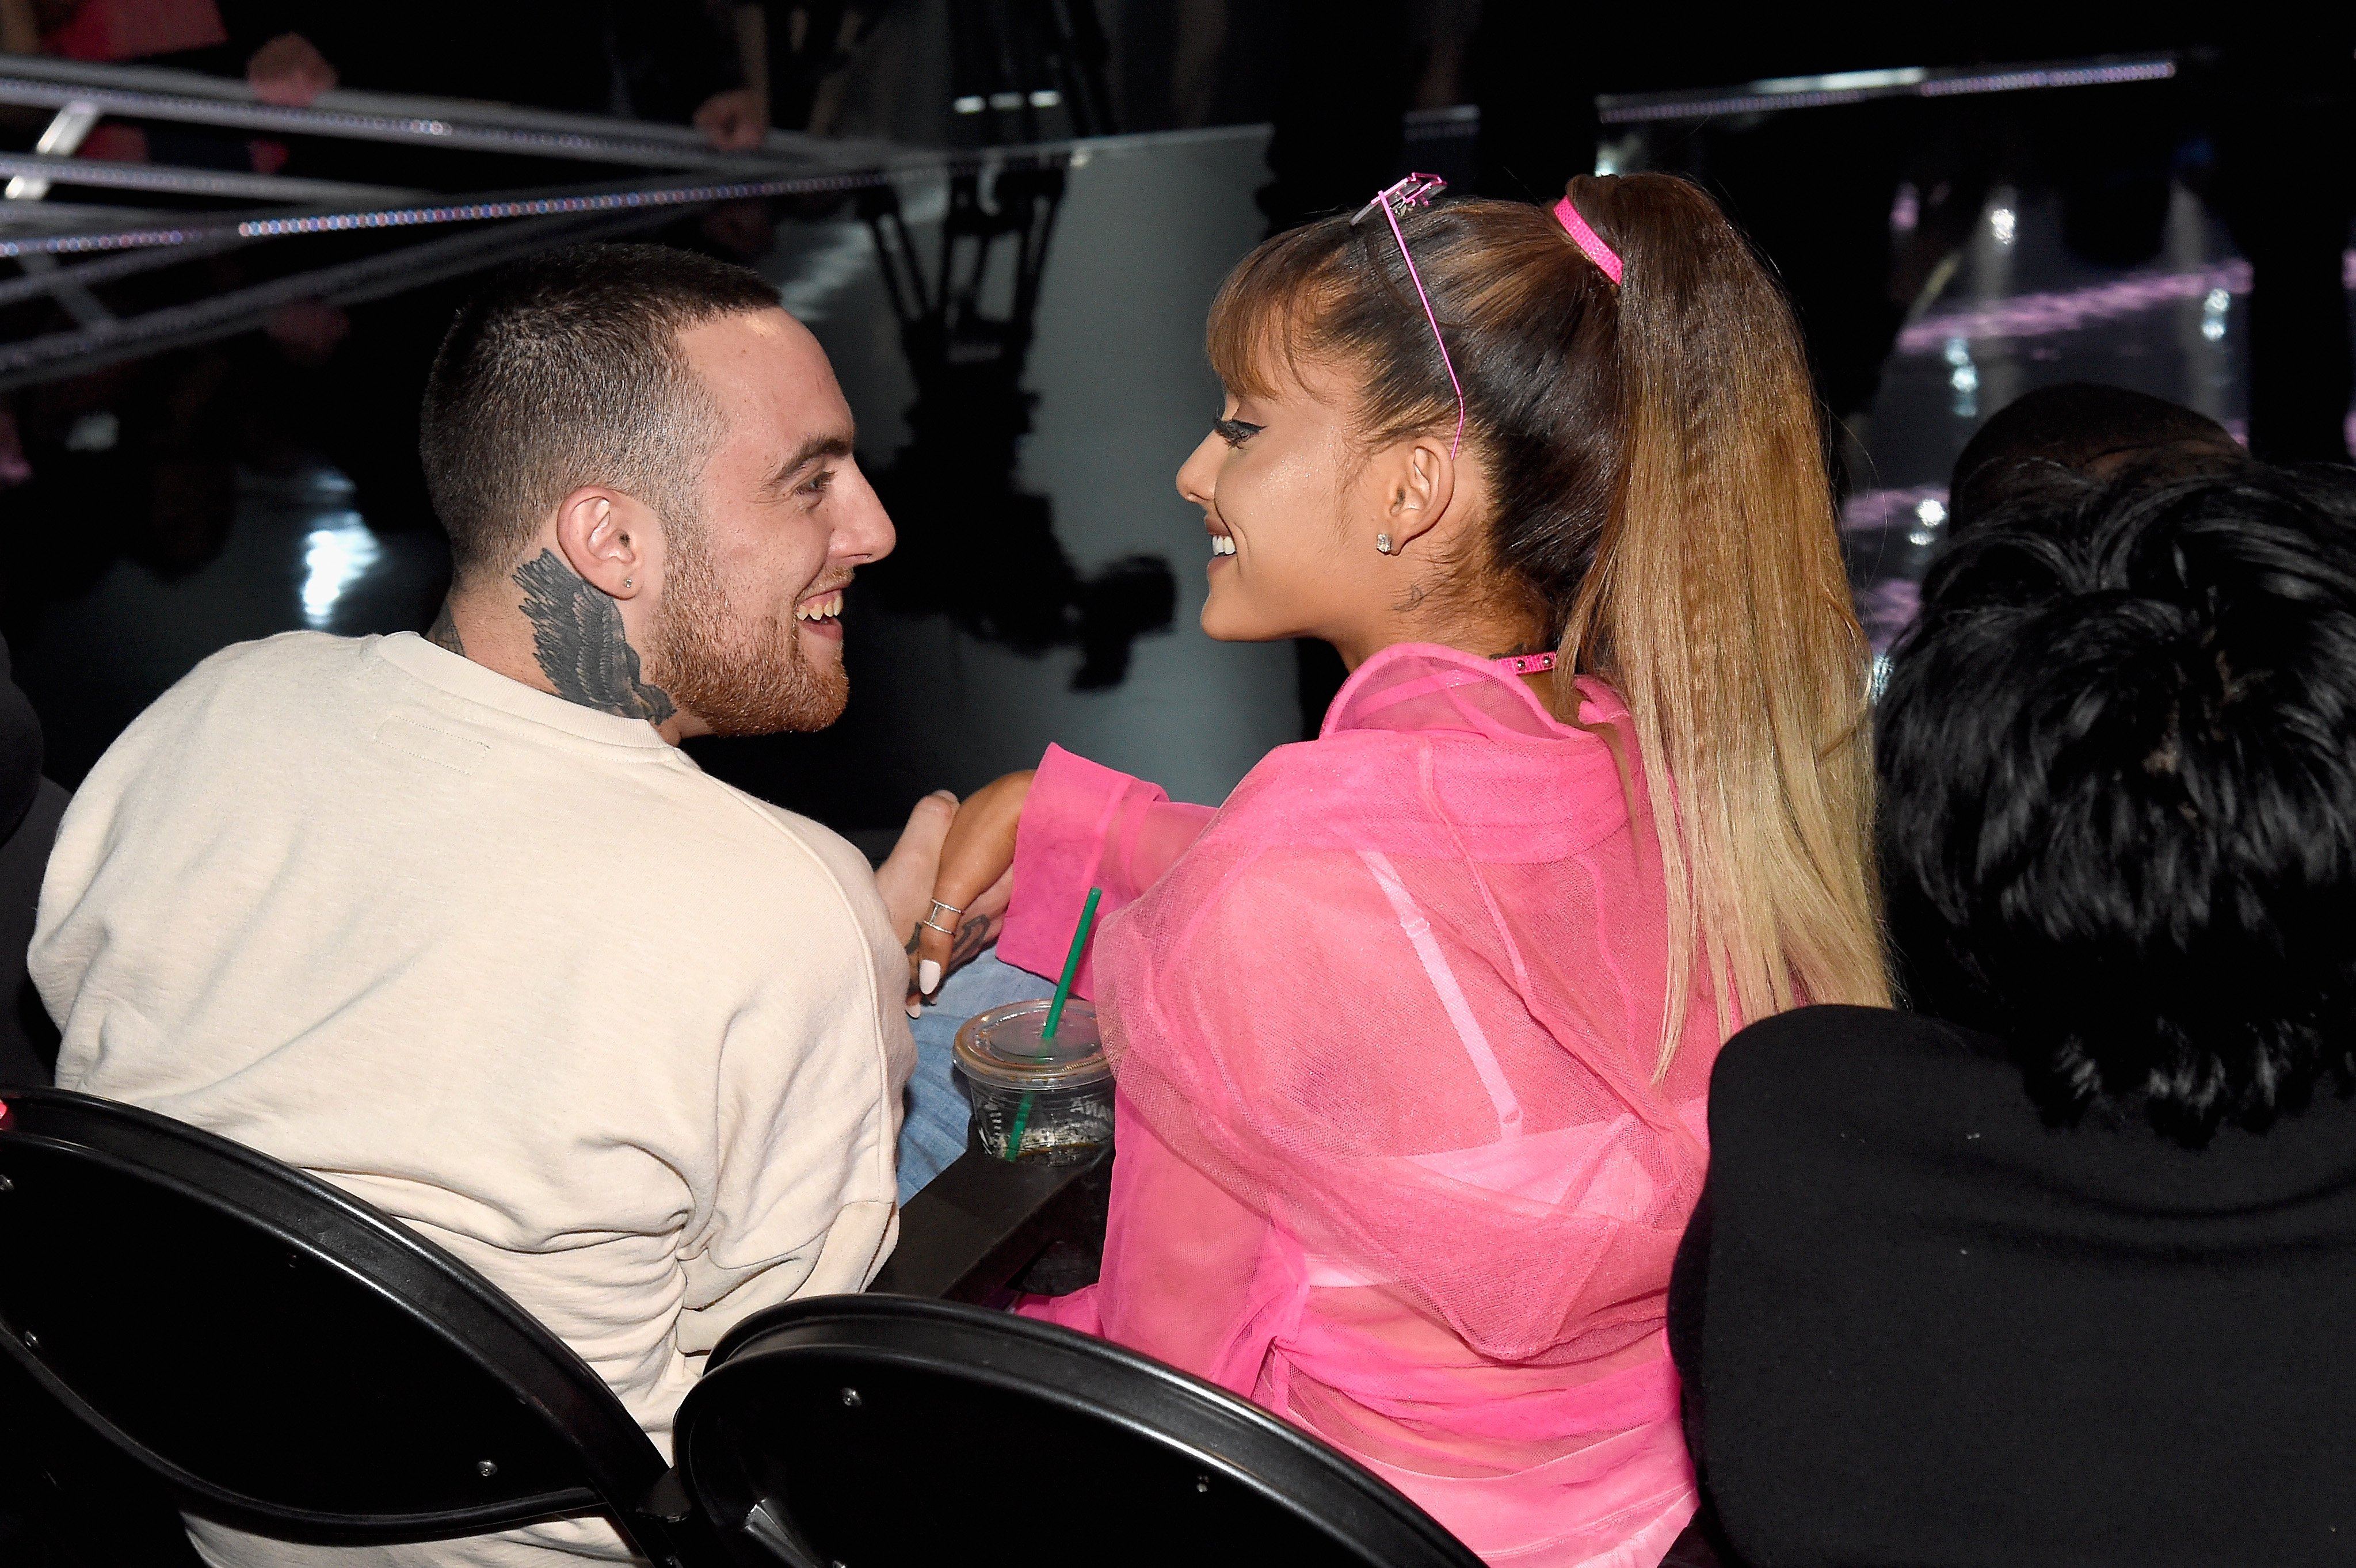 Mac Miller and Ariana Grande share a moment